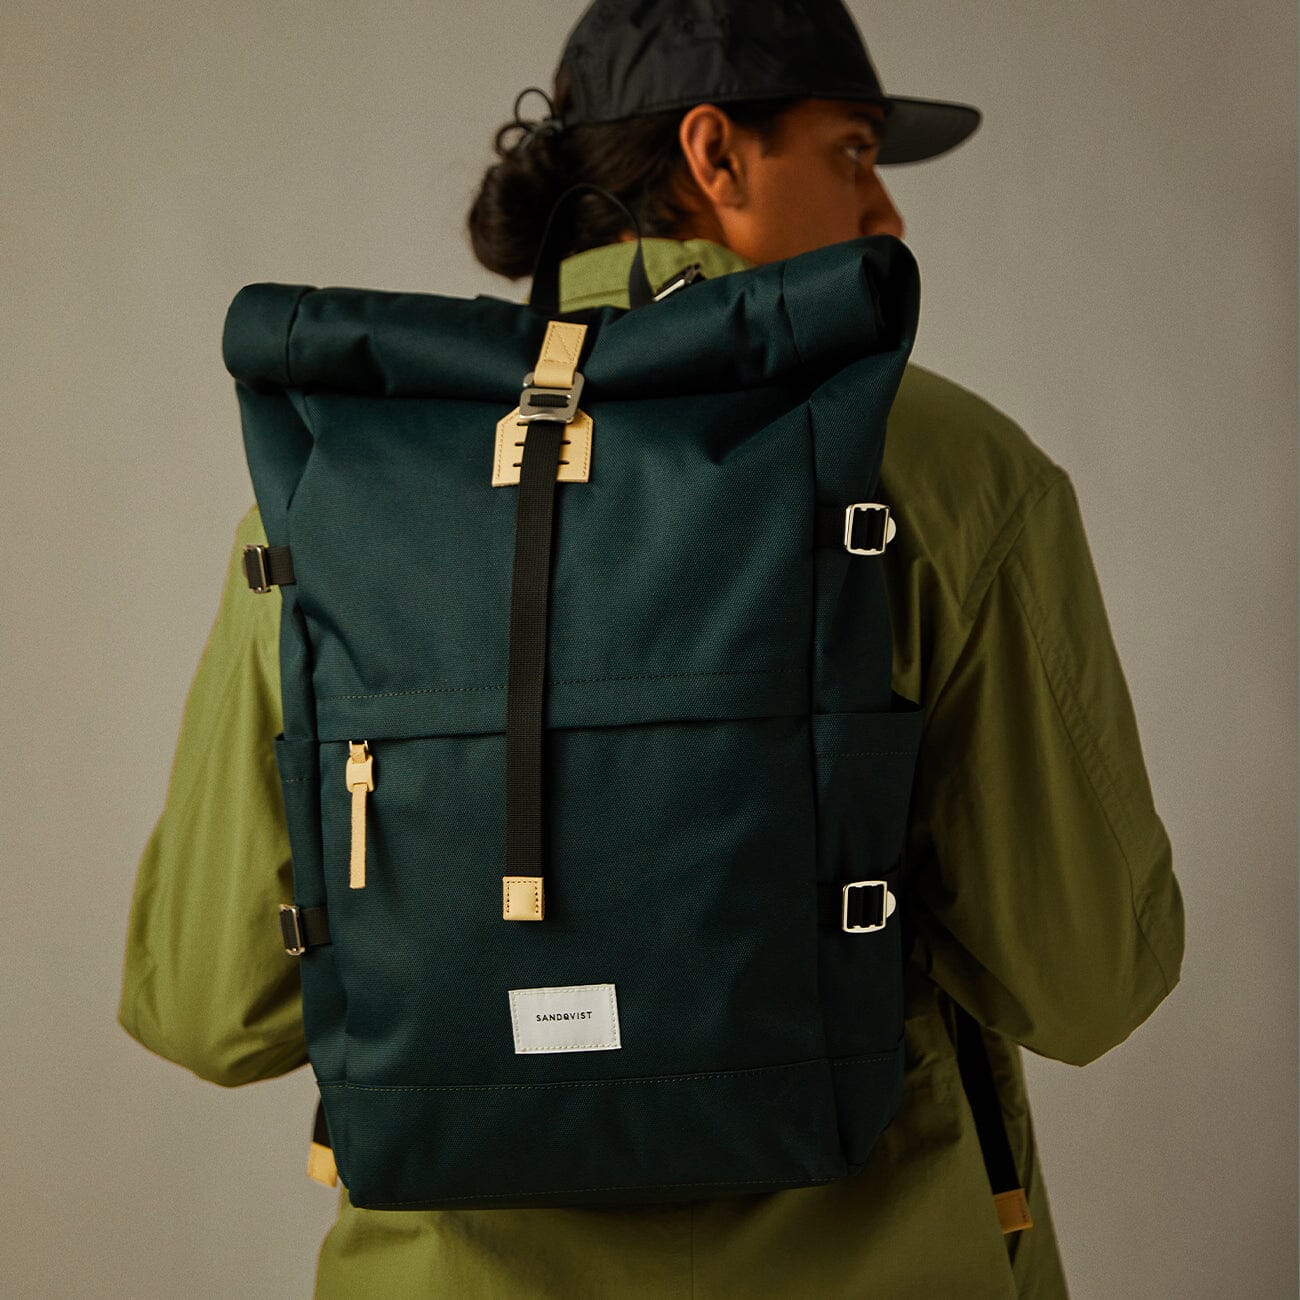 man wearing a backpack made from eco-friendly rPet brent sandqvist green color